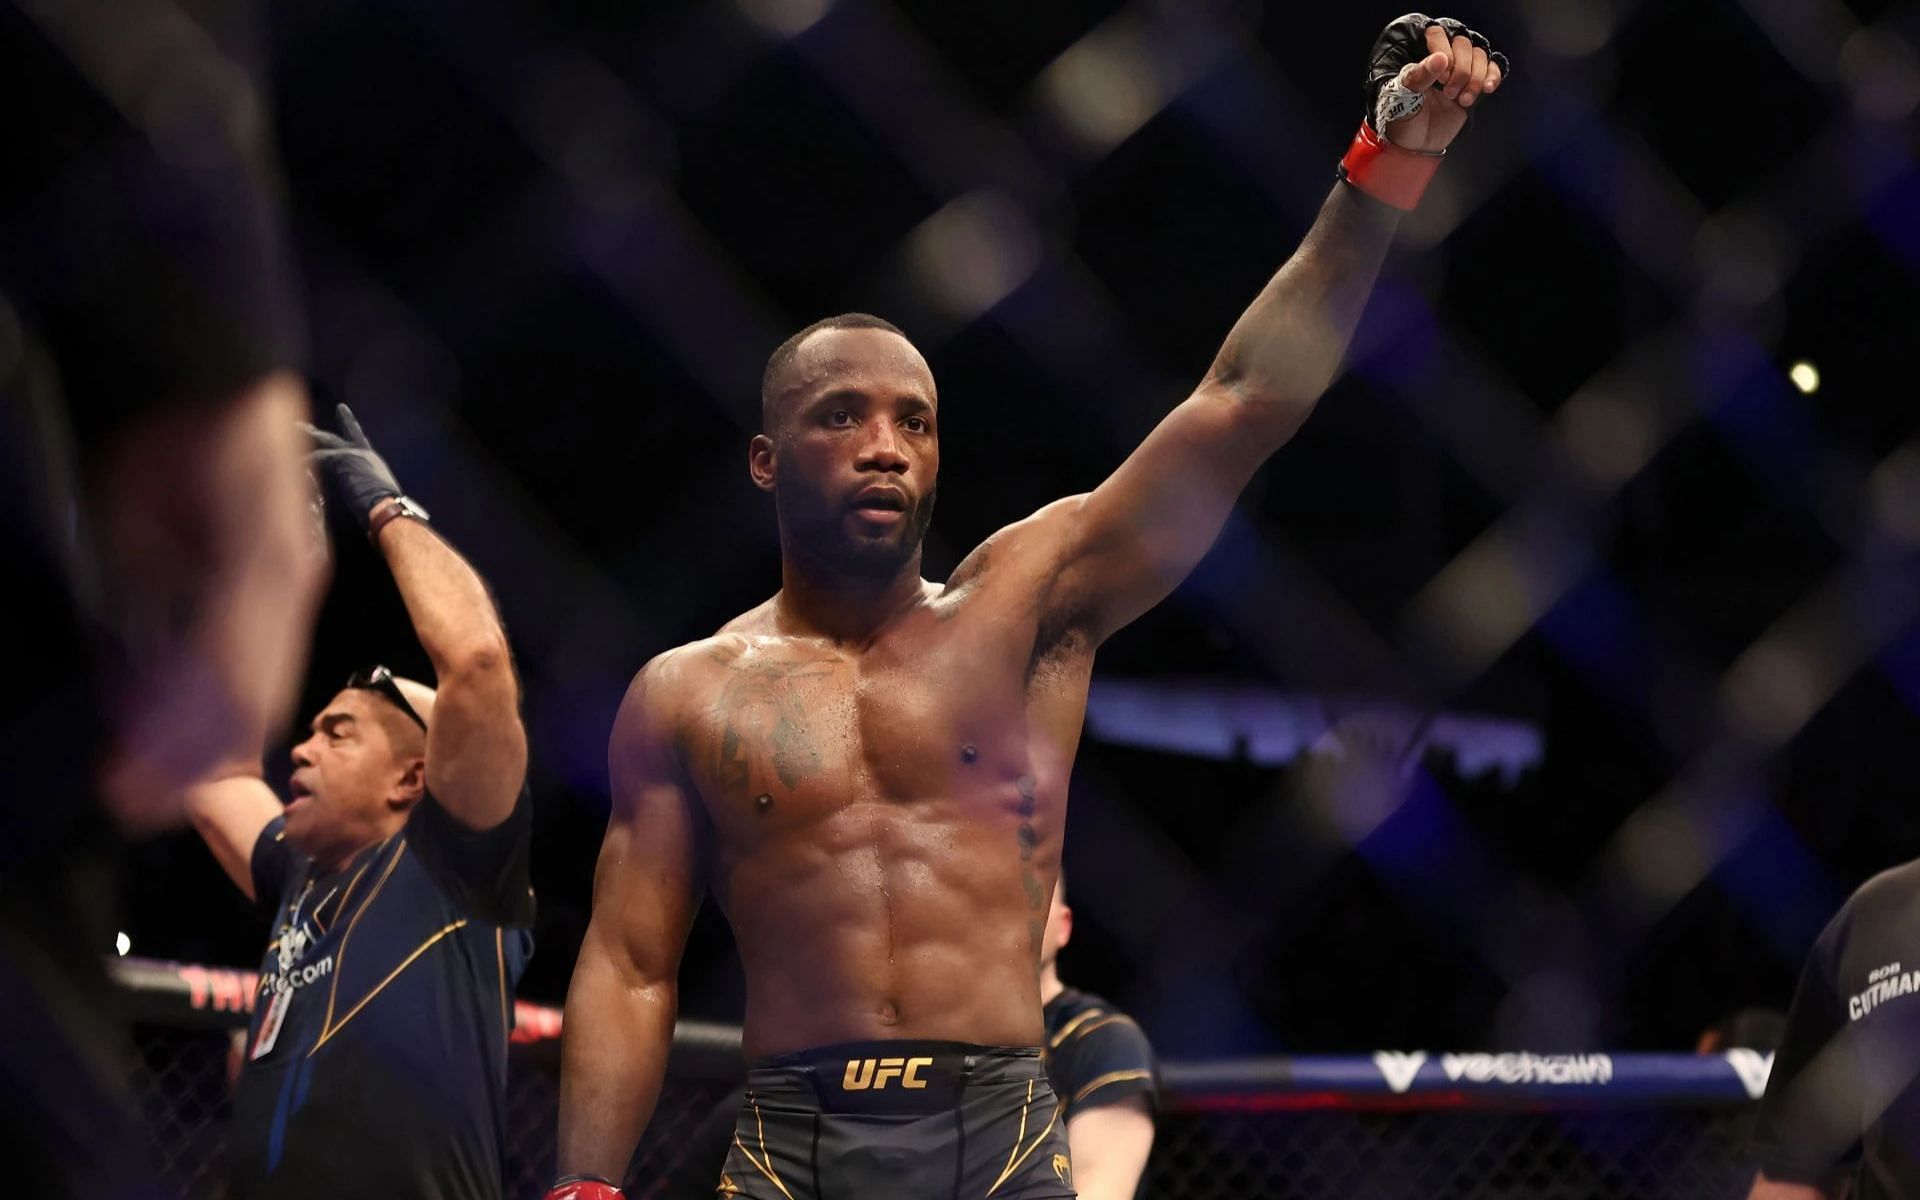 After his big win last night, who is next for Leon Edwards?